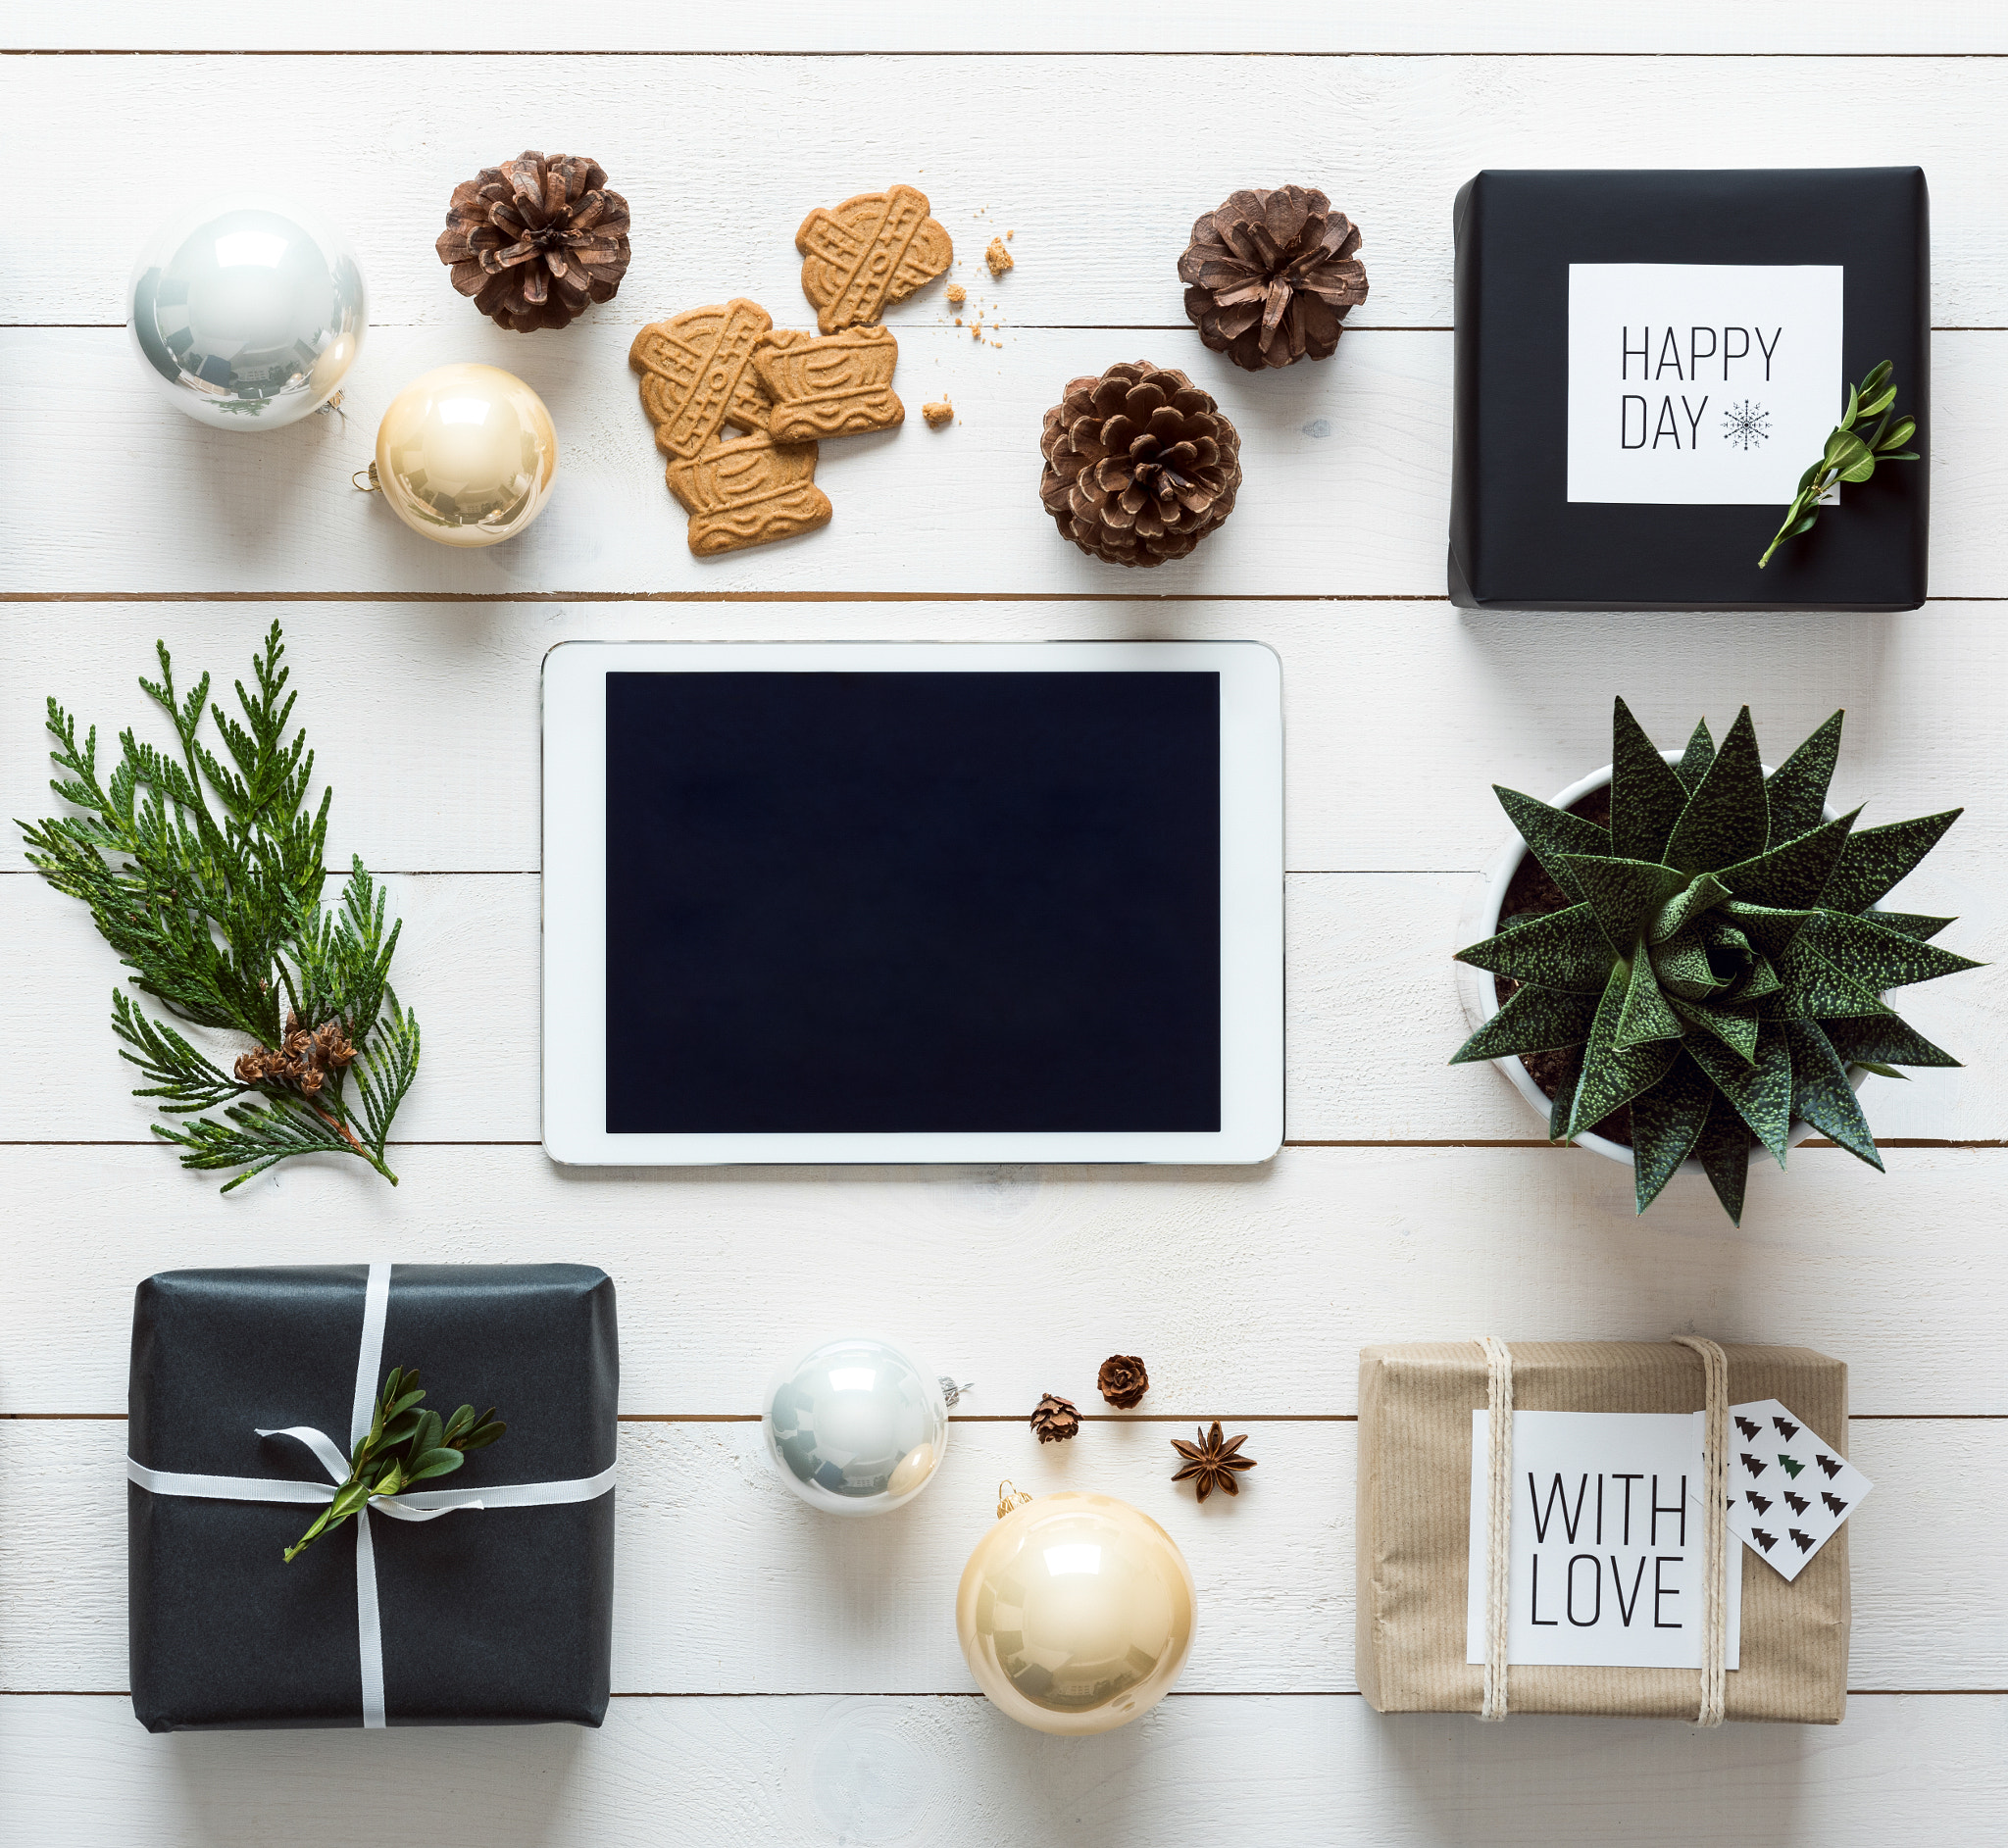 Elegant nordic retro christmas background, desk view from above, online shopping concept